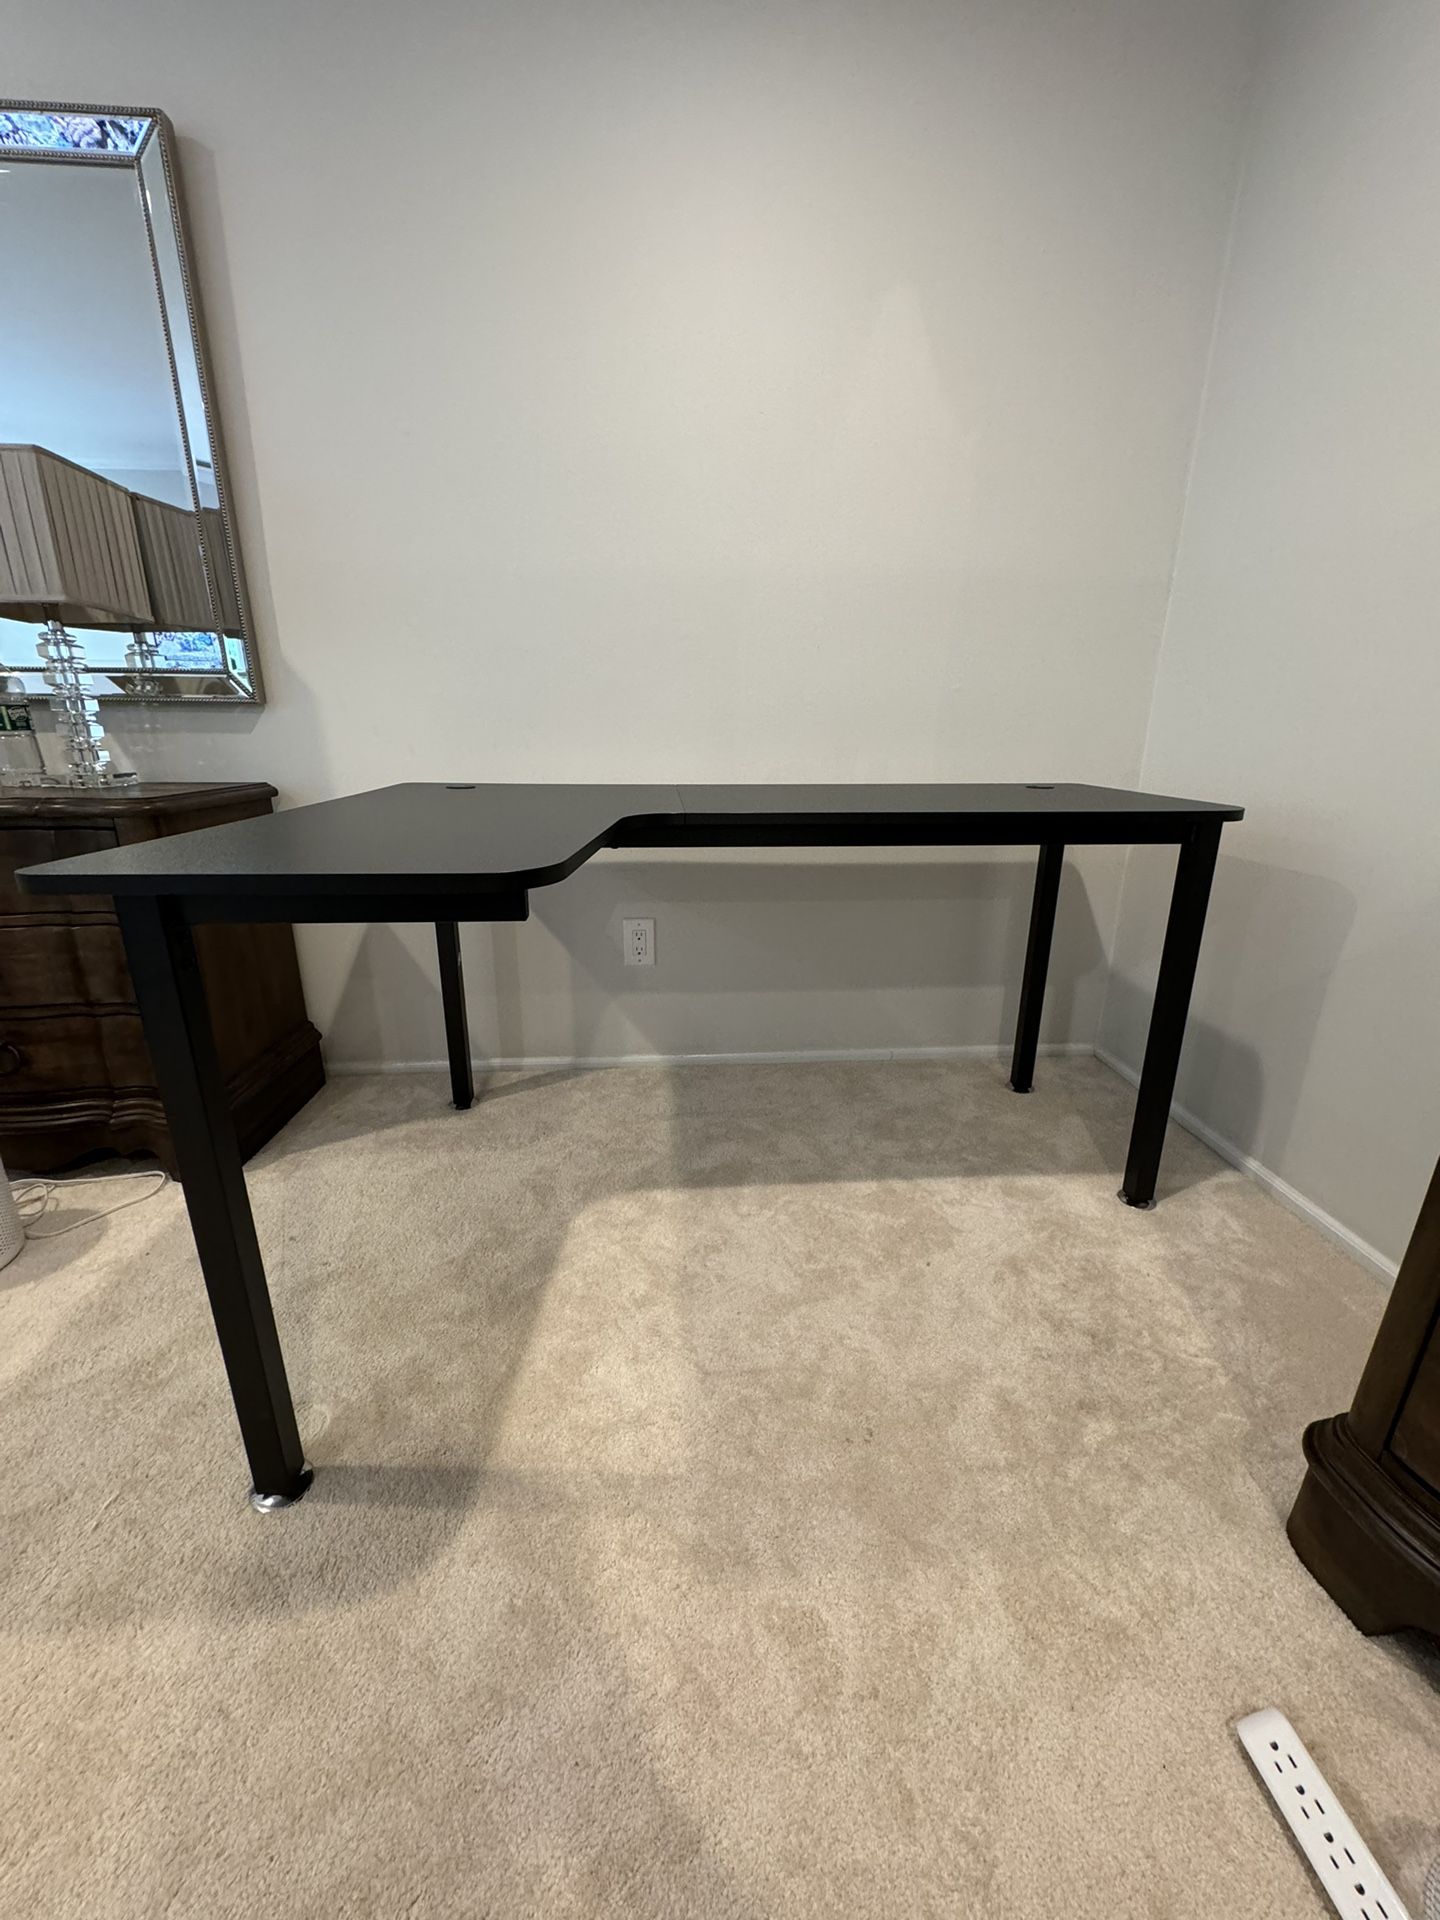 60 Inch L Shaped Desk For Sale